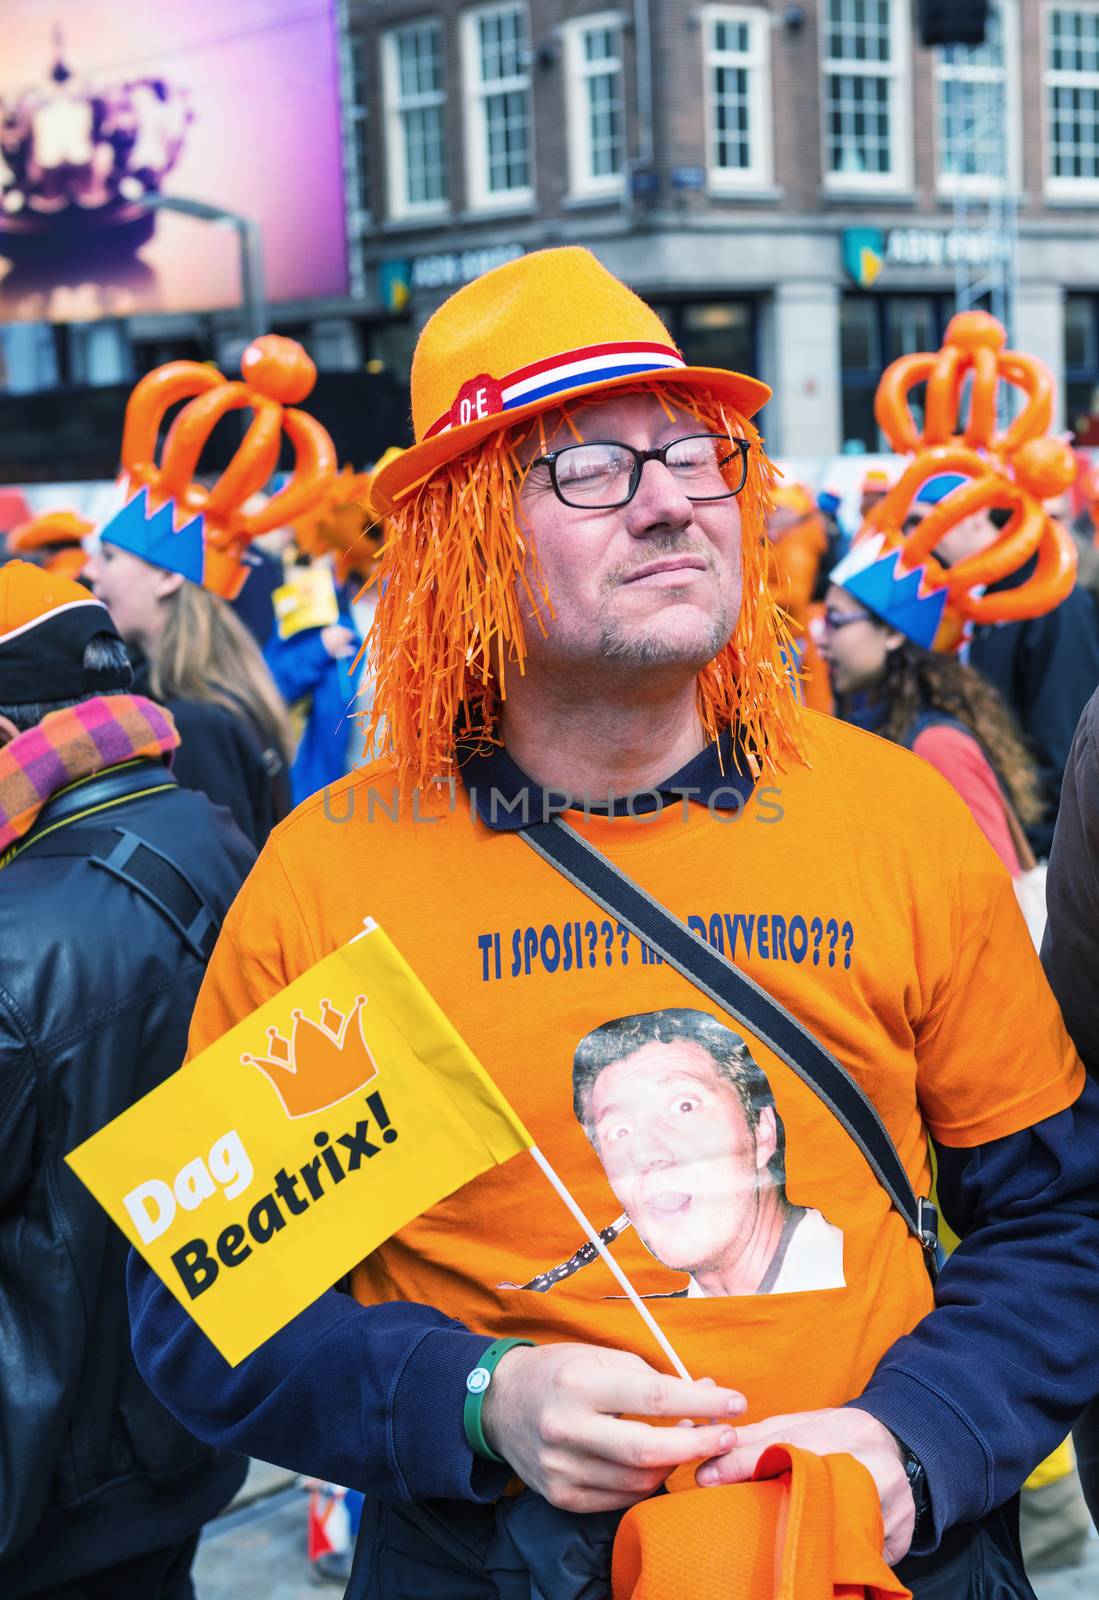 AMSTERDAM - APRIL 30: City natives and tourists celebrate Queen's Day, Dutch annual national holiday, in the streets of the city, on April 30, 2013 in Amsterdam, The Netherlands.